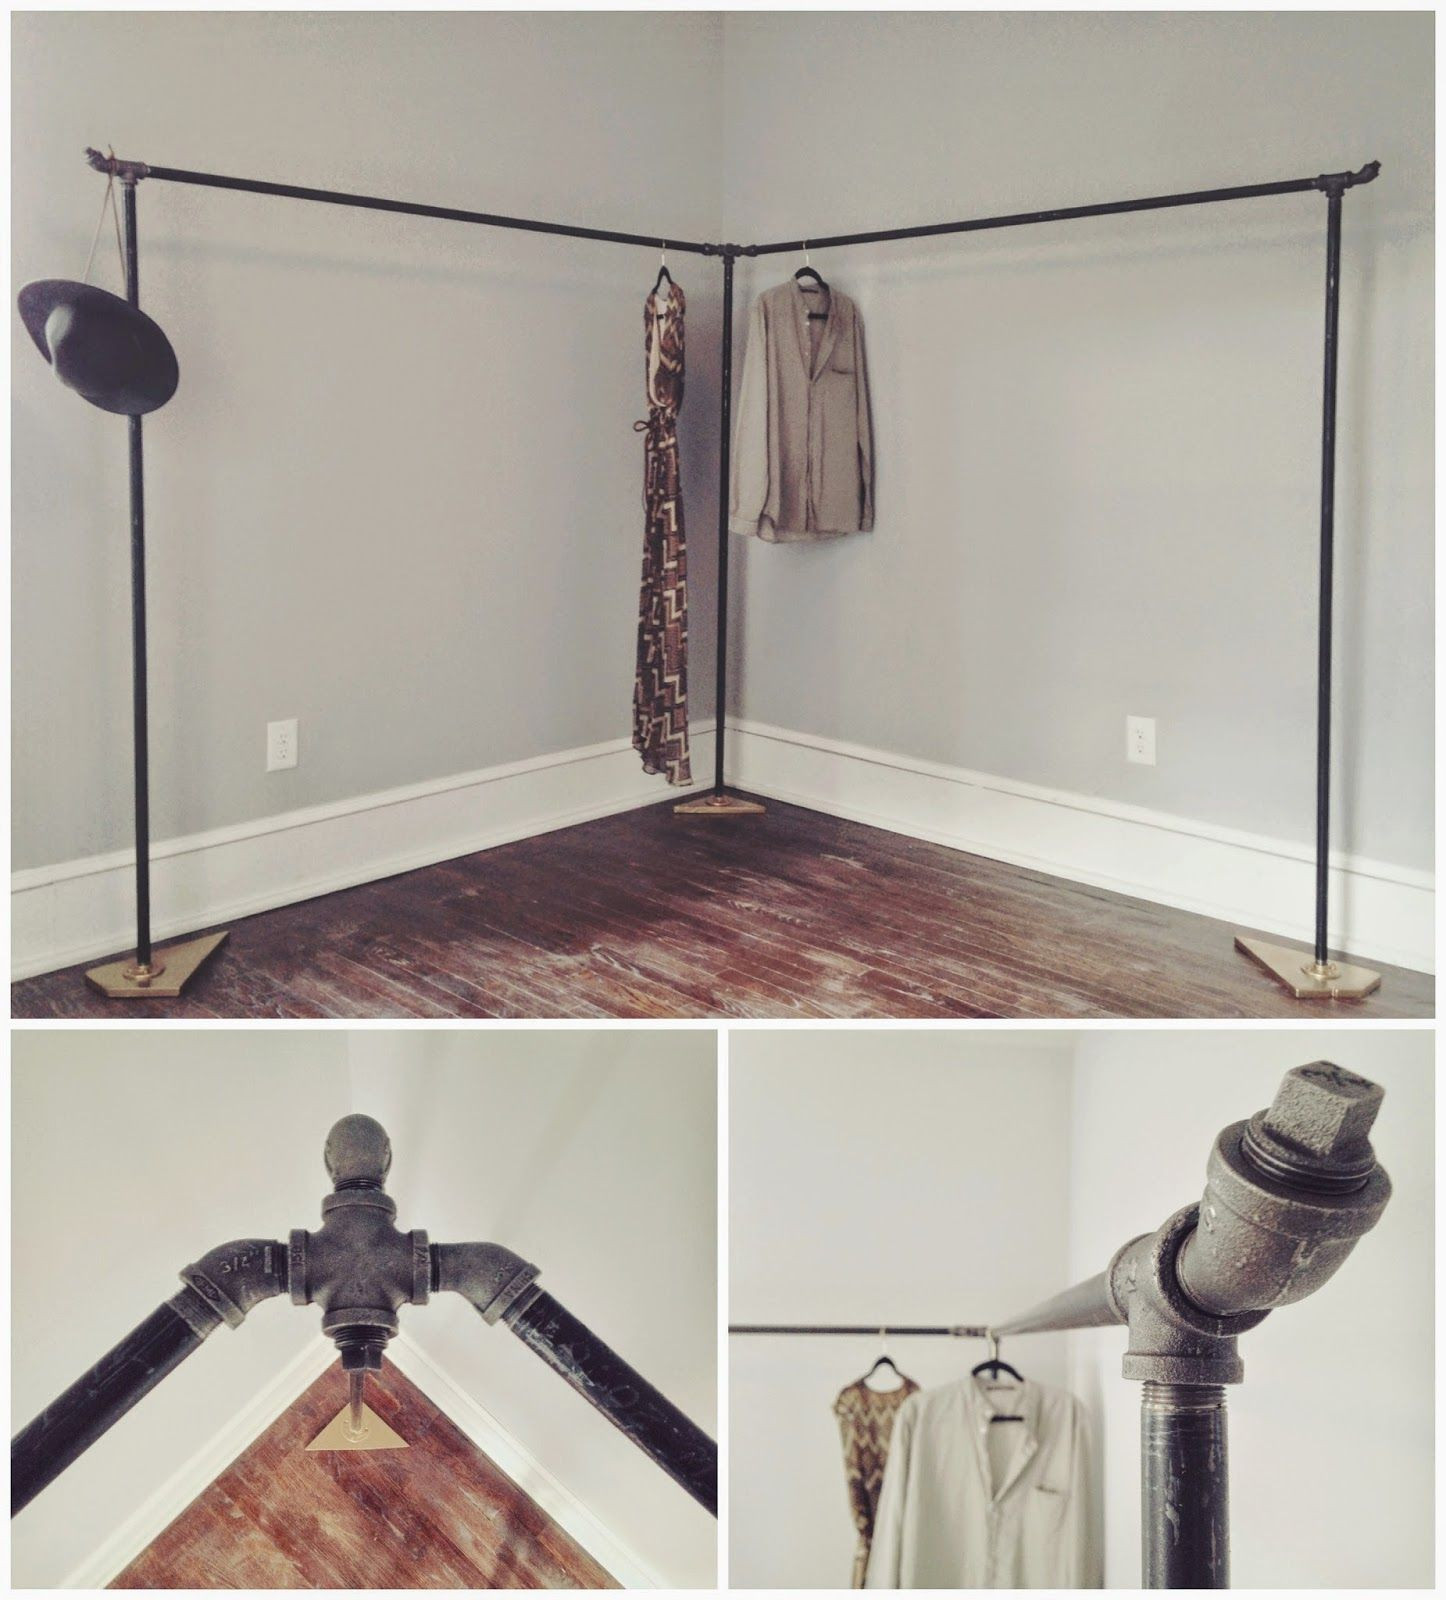 DIY Pipe Clothing Rack
 Awash with Wonder That Time We Built A Clothes Rack DIY